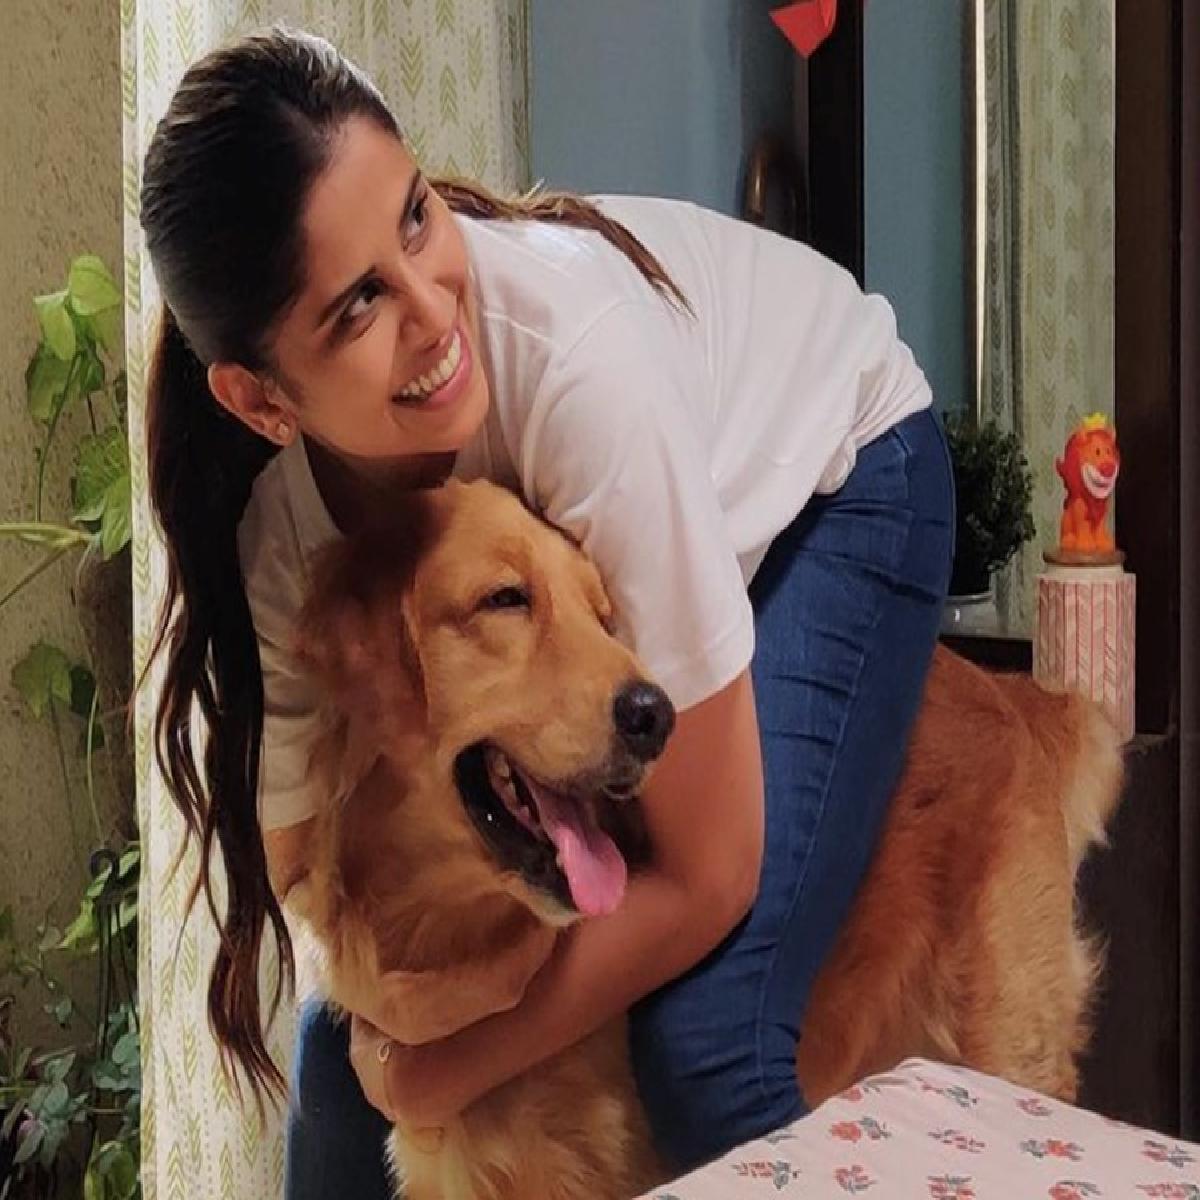 Pet Puran Is Something Fresh And Unique For The Audience Says Sai Tamhankar